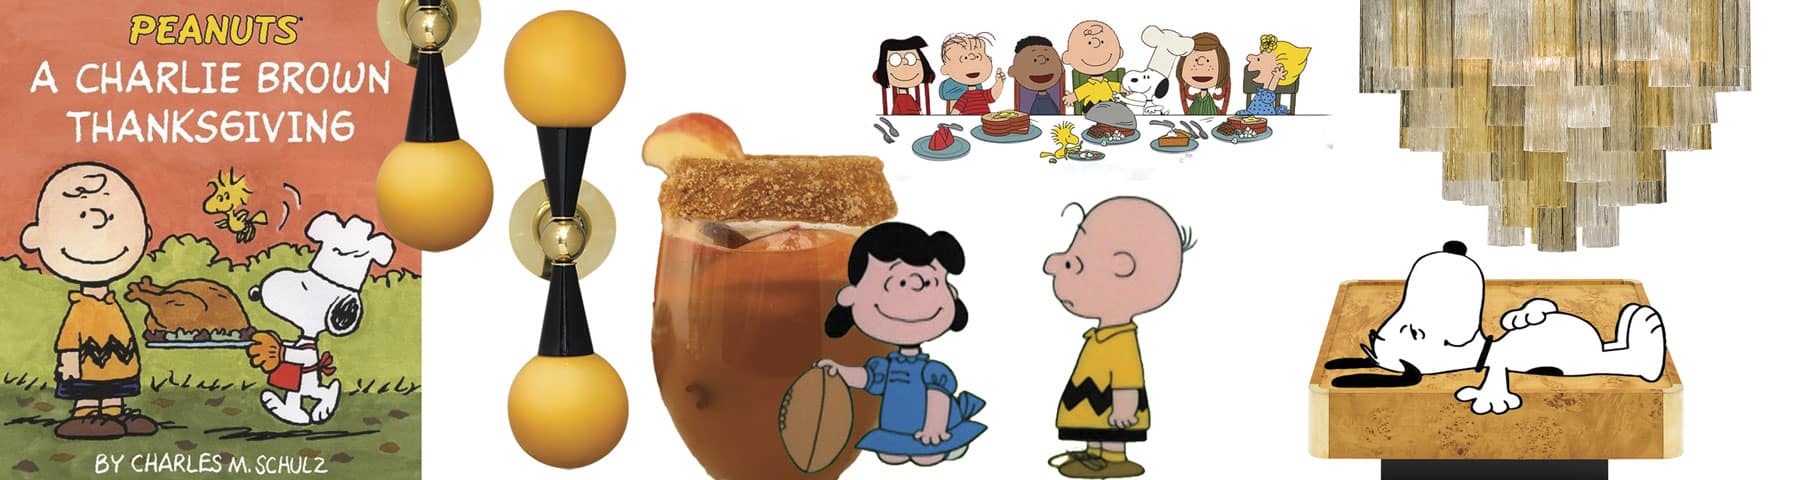 Charlie Brown Thanksgiving. The perfect classic family movie for your post feast movie. Pair it with a nice Thanskgiving cocktail, the Apple Cider Peanut Butter Whiskey Cider